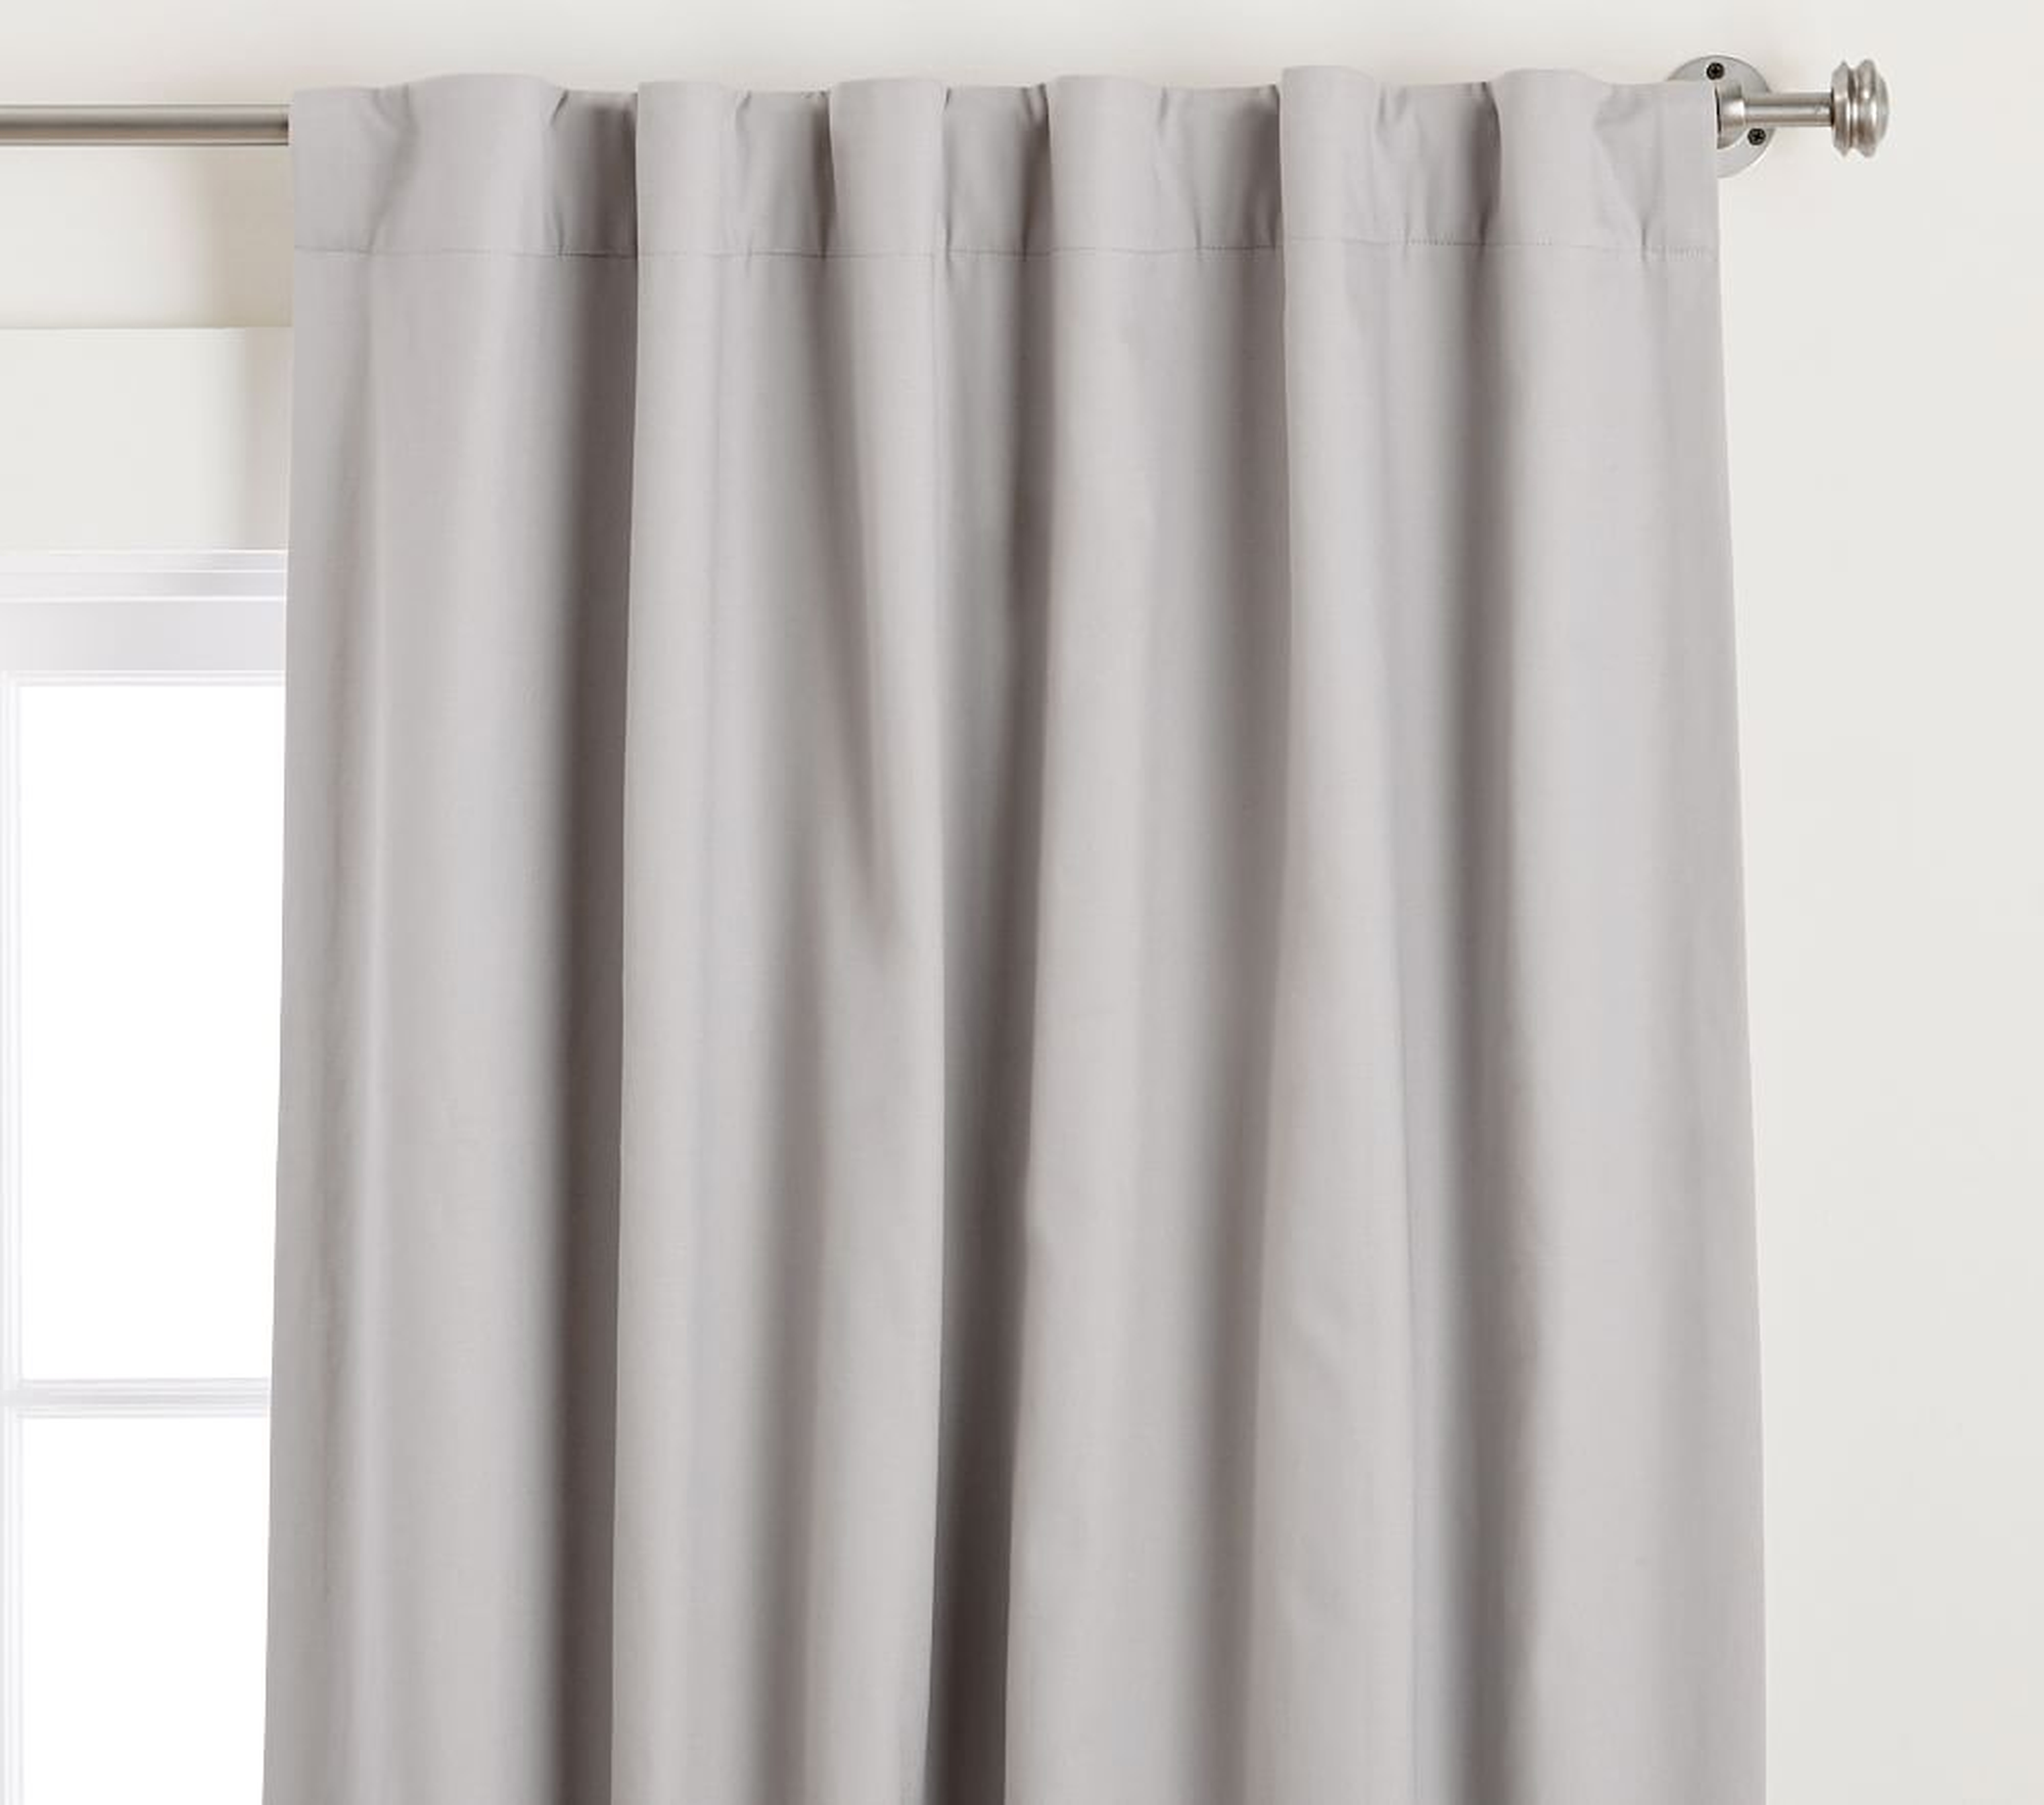 Soothing Sleep Noise Reducing Blackout Curtain, 84 Inches, Gray - Pottery Barn Kids